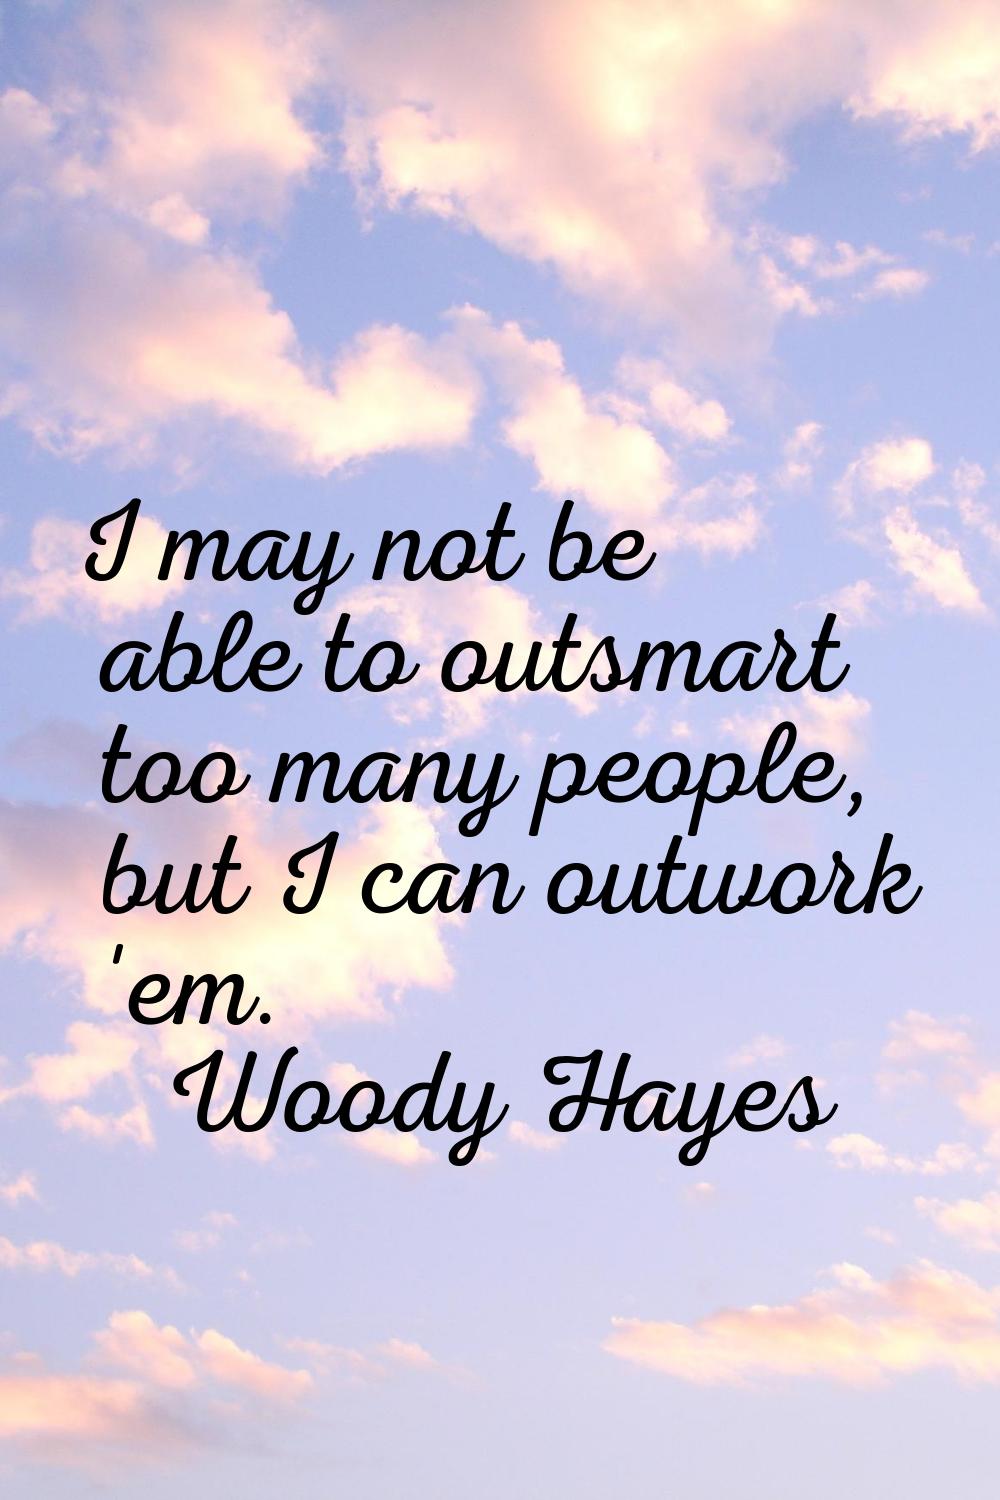 I may not be able to outsmart too many people, but I can outwork 'em.